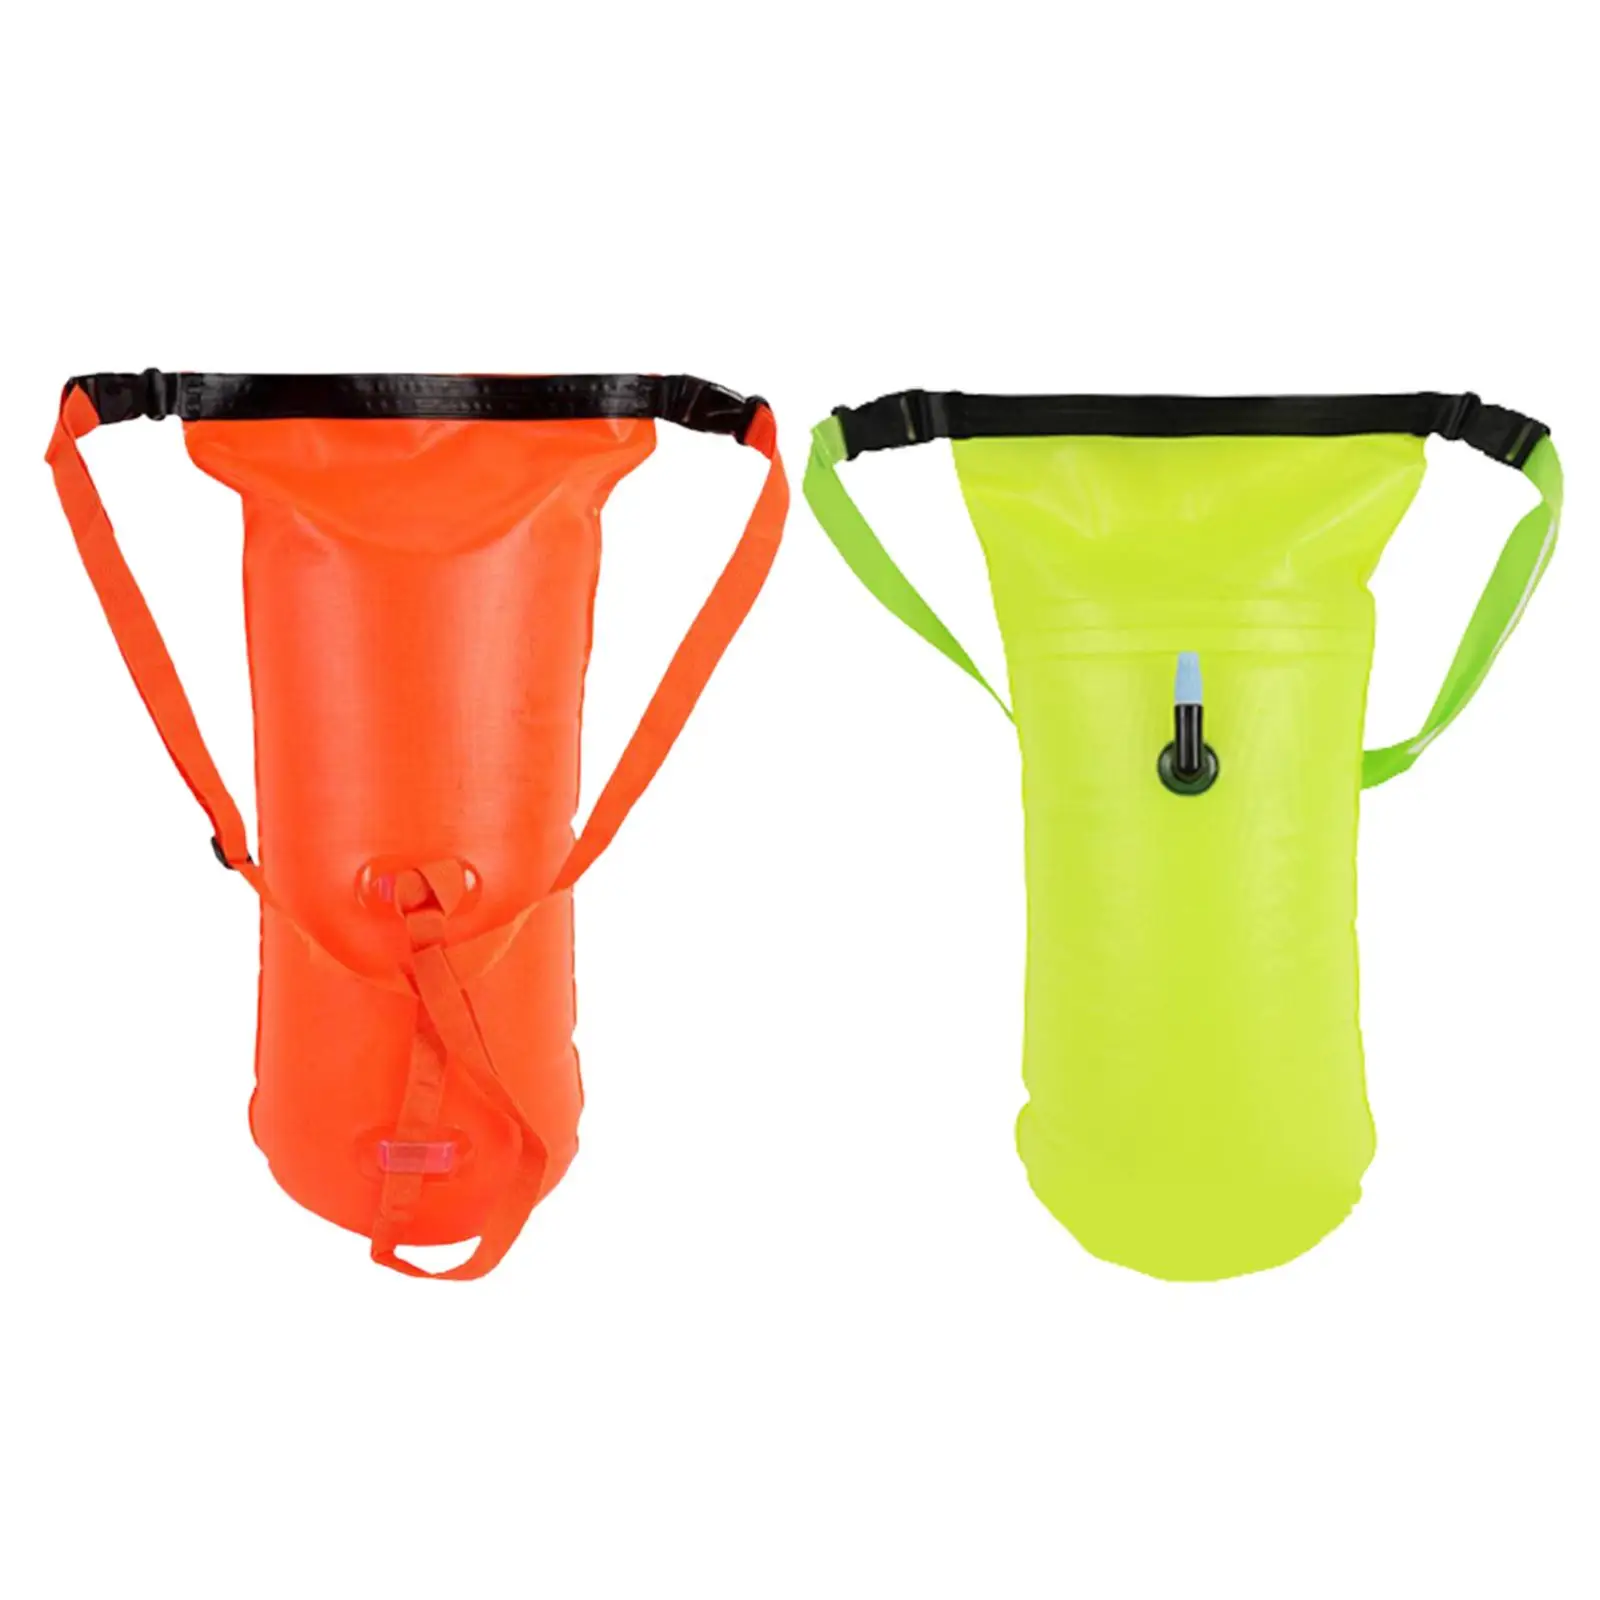 Safety Swim Buoy Float Waterproof Storage Bag for Canoe Hiking Camping